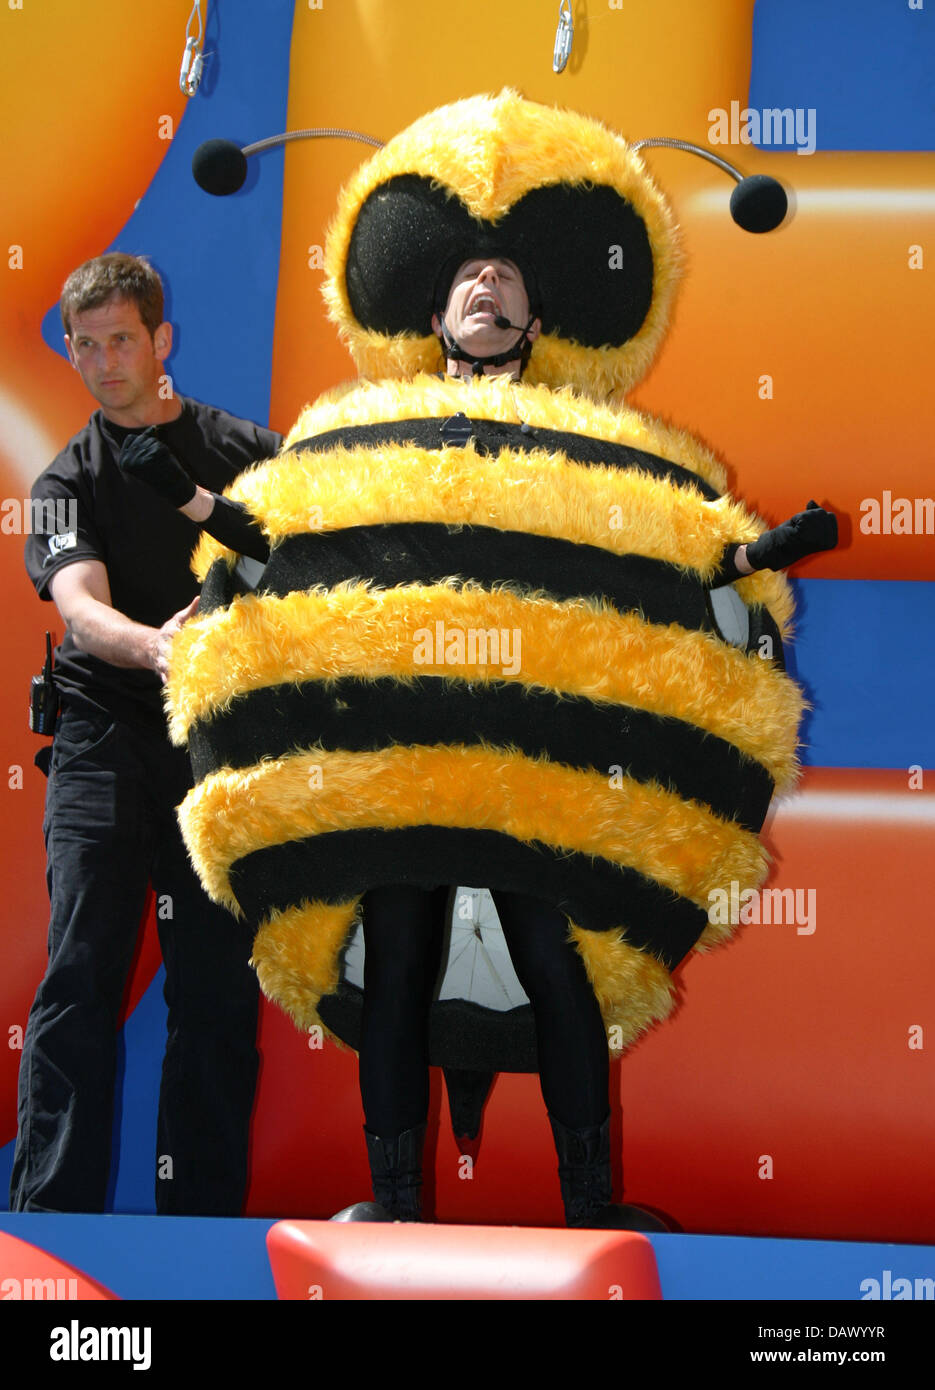 US comedian Jerry Seinfeld is pictured in a bee costume at a promotion of  the animated film 'Bee Movie' at the 60th Filmfestival in Cannes, France,  17 May 2007. Photo: Hubert Boesl